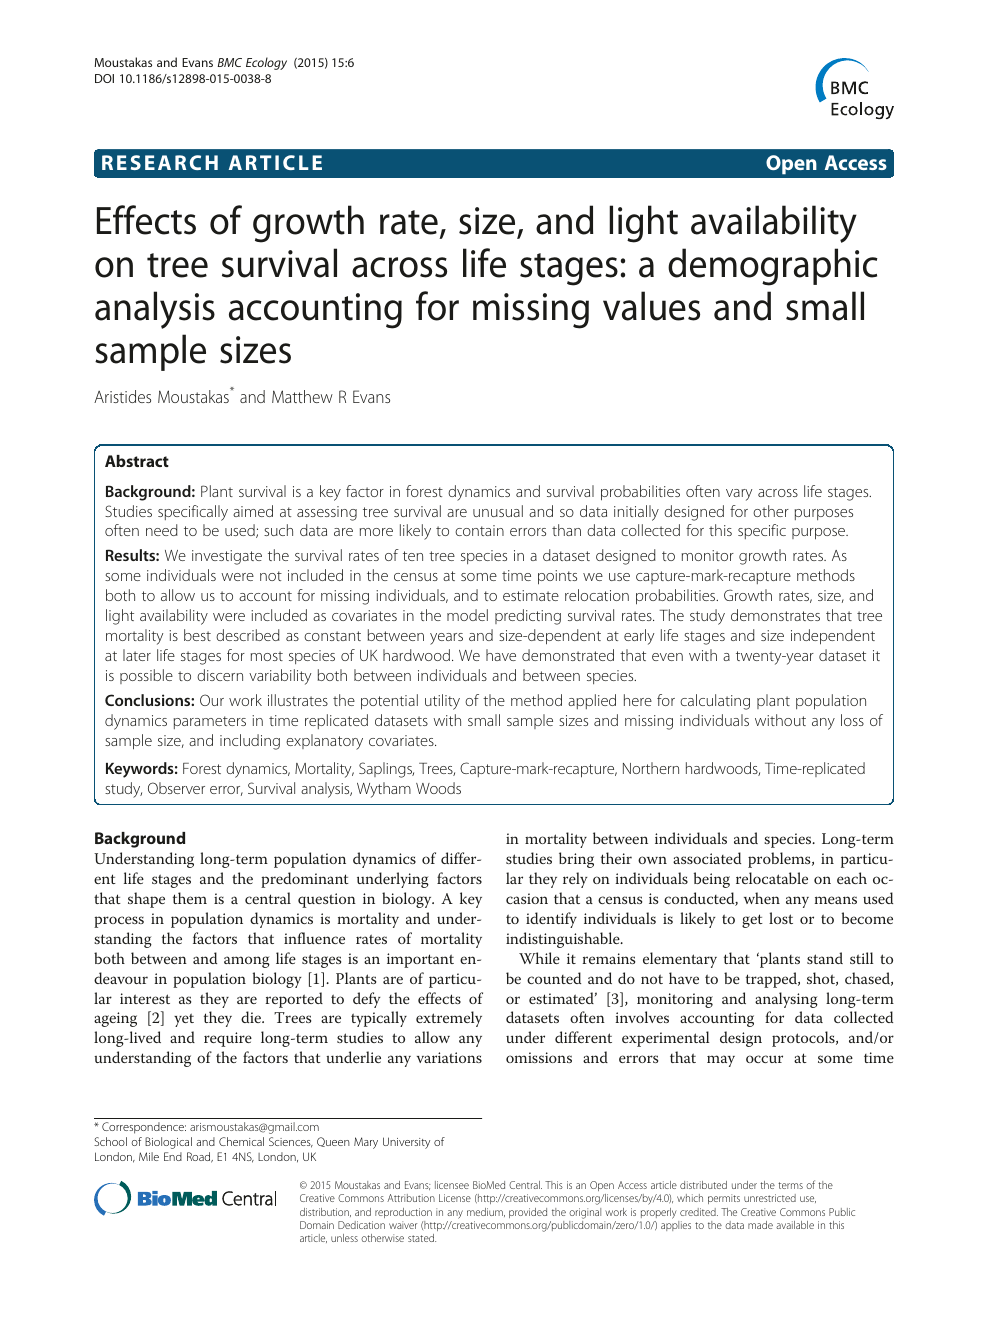 Effects Of Growth Rate Size And Light Availability On Tree Survival Across Life Stages A Demographic Analysis Accounting For Missing Values And Small Sample Sizes Topic Of Research Paper In Biological